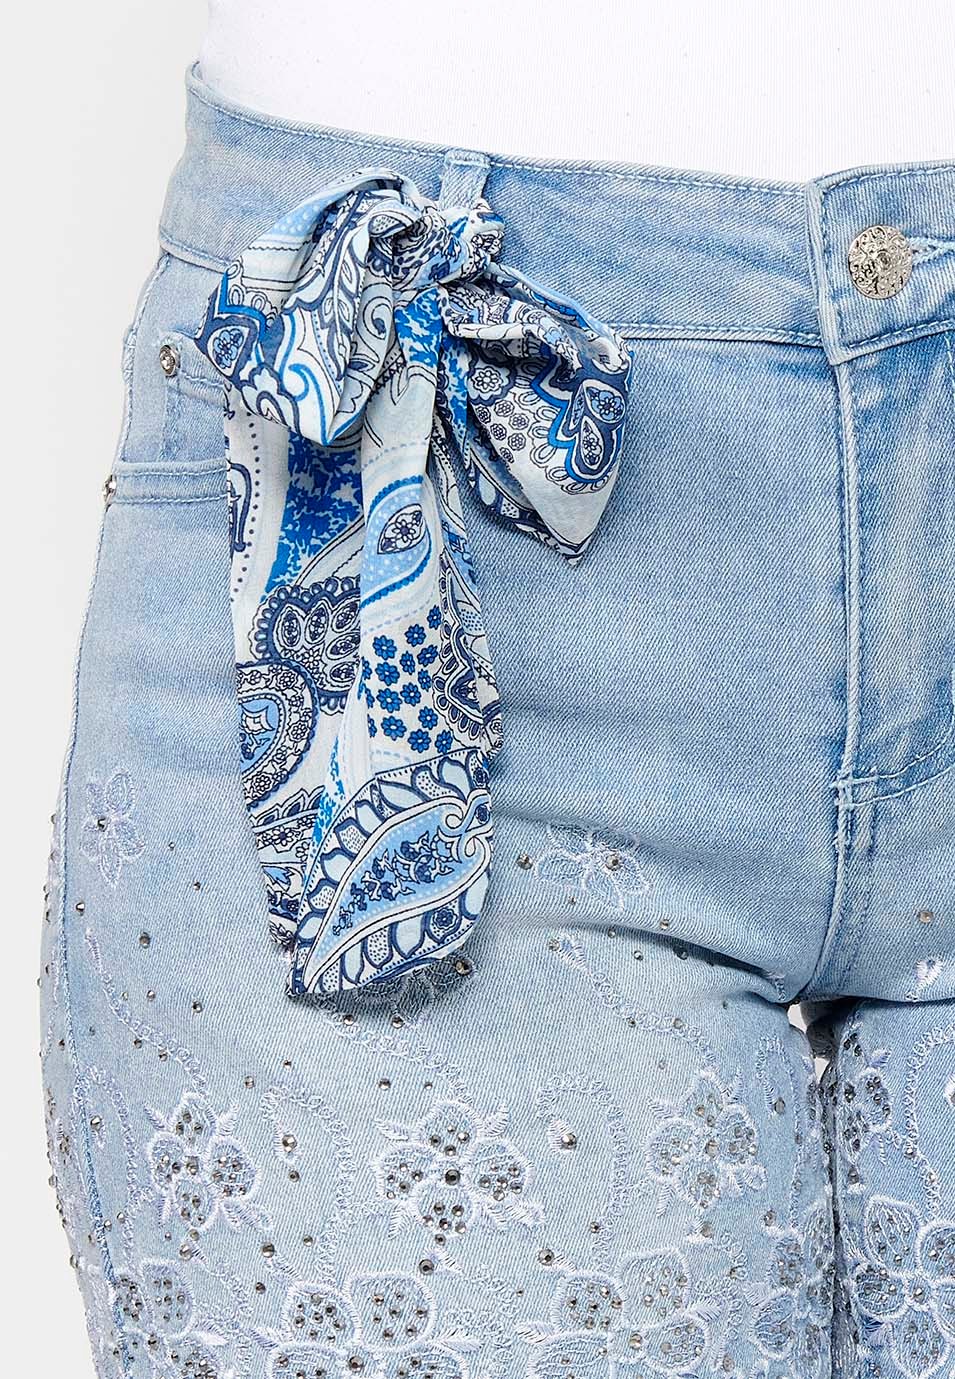 Short denim shorts finished with lace and floral embroidery with front closure with zipper and button with removable bow detail in Blue for Women 11